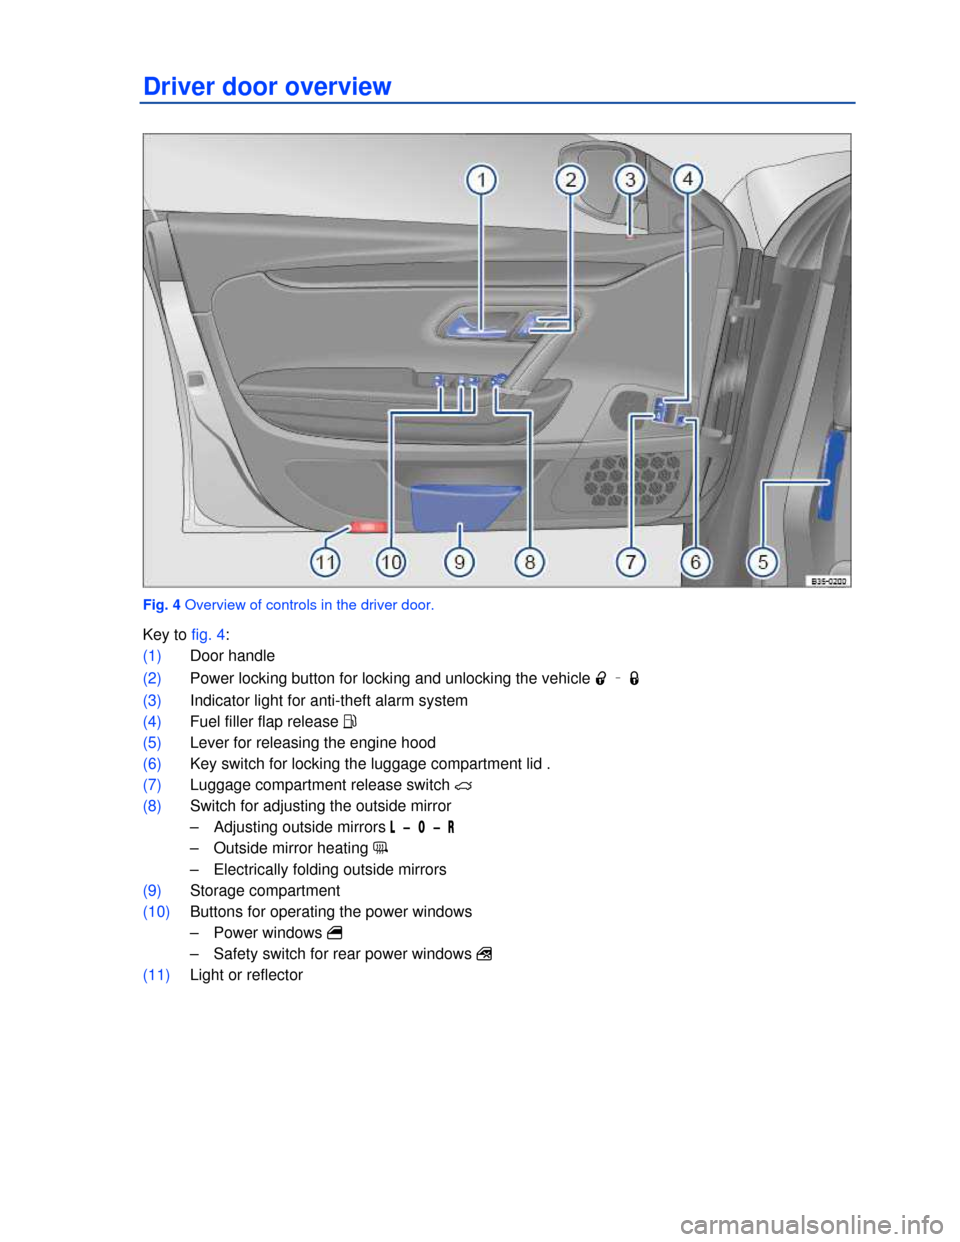 VOLKSWAGEN PASSAT CC 2013 1.G Owners Manual  
Driver door overview 
 
Fig. 4 Overview of controls in the driver door. 
Key to fig. 4: 
(1) Door handle  
(2) Power locking button for locking and unlocking the vehicle �0 – �1  
(3) Indicator li